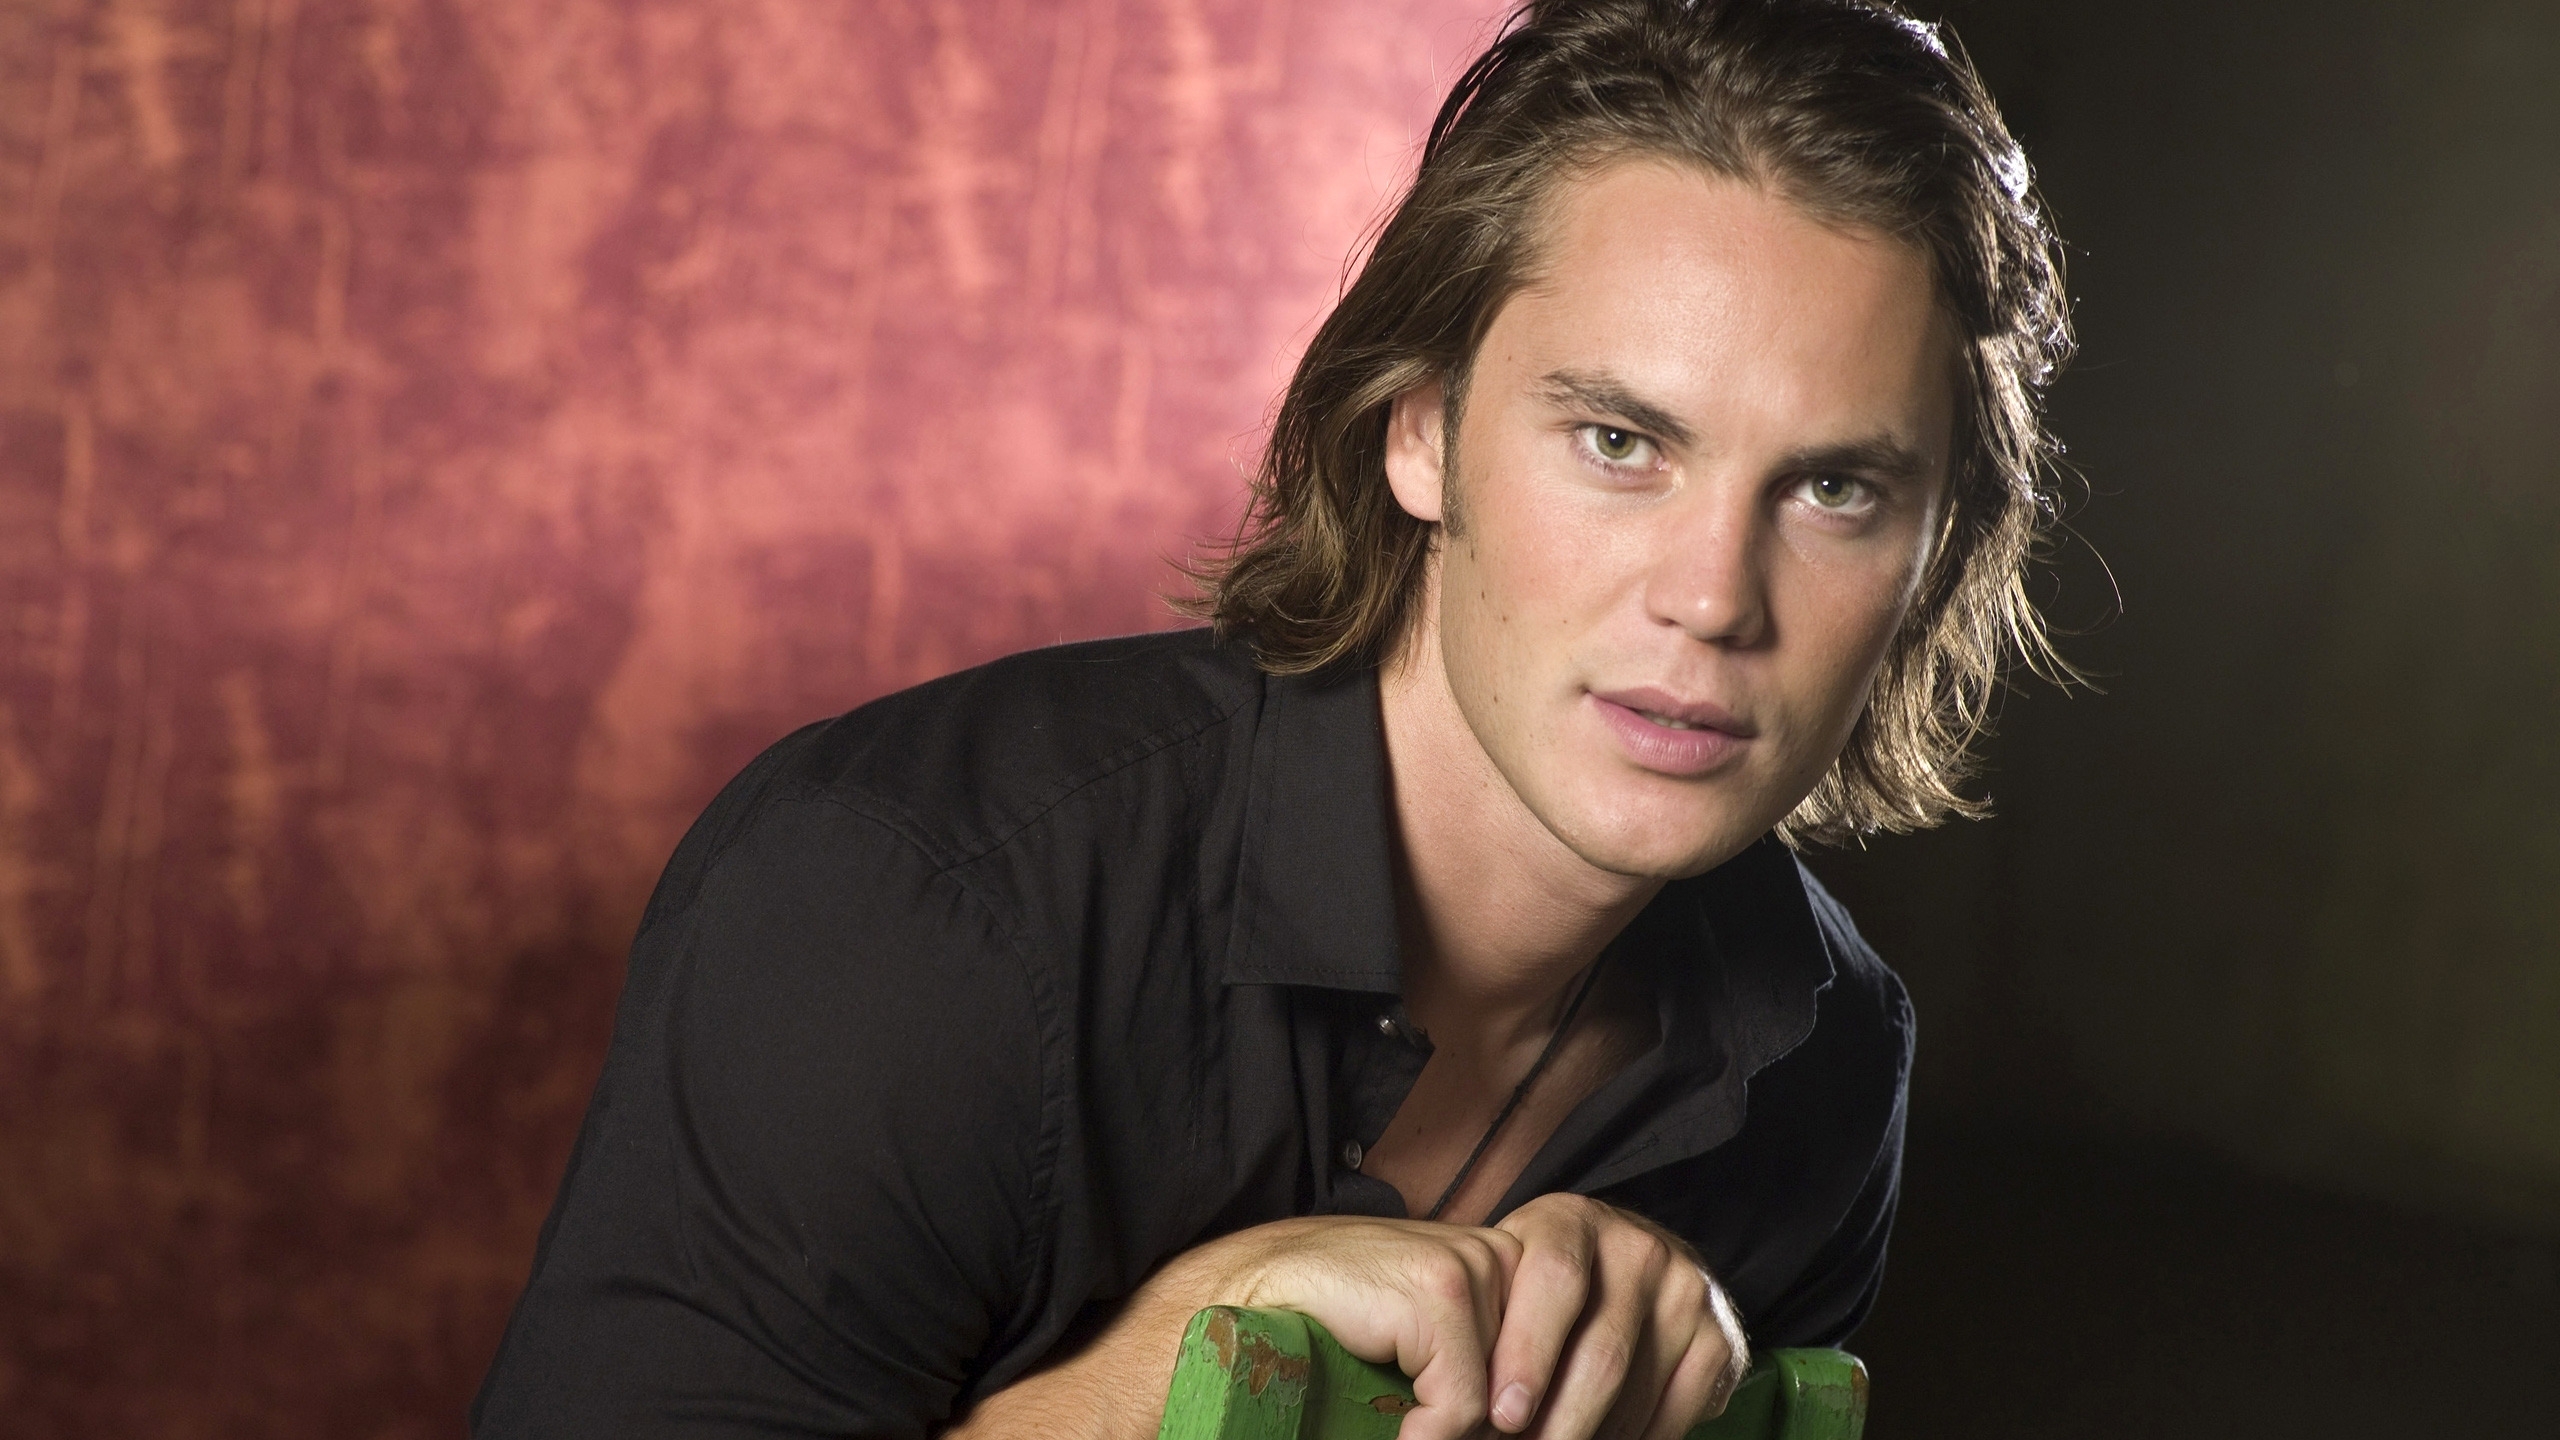 Taylor Kitsch for 2560x1440 HDTV resolution